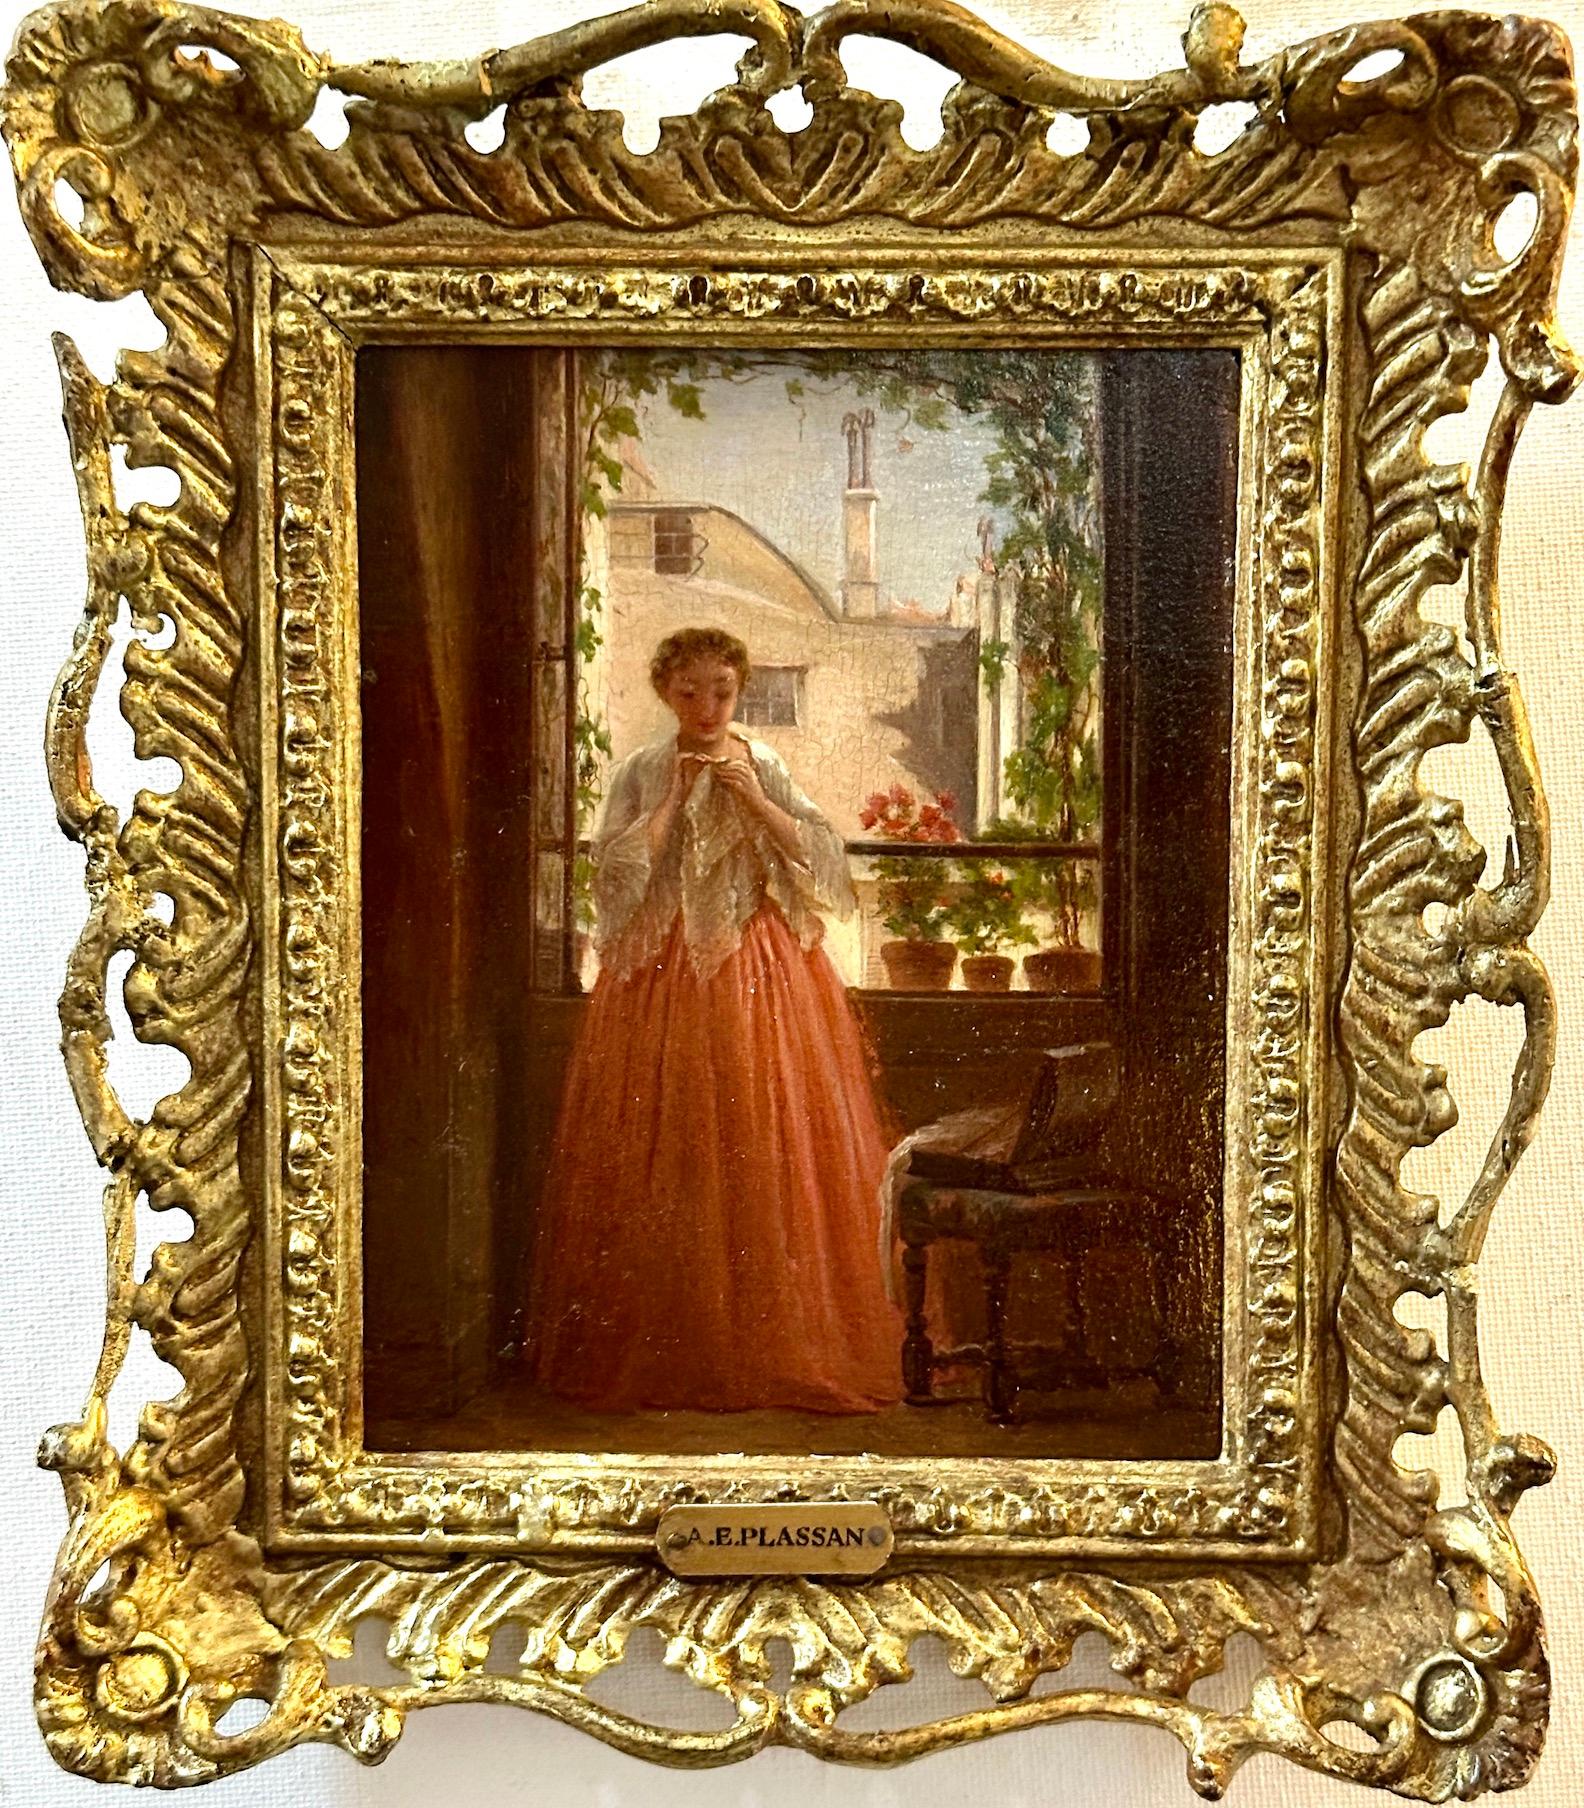 French 19th century, Lady looking at a jewel in an interior, South of France